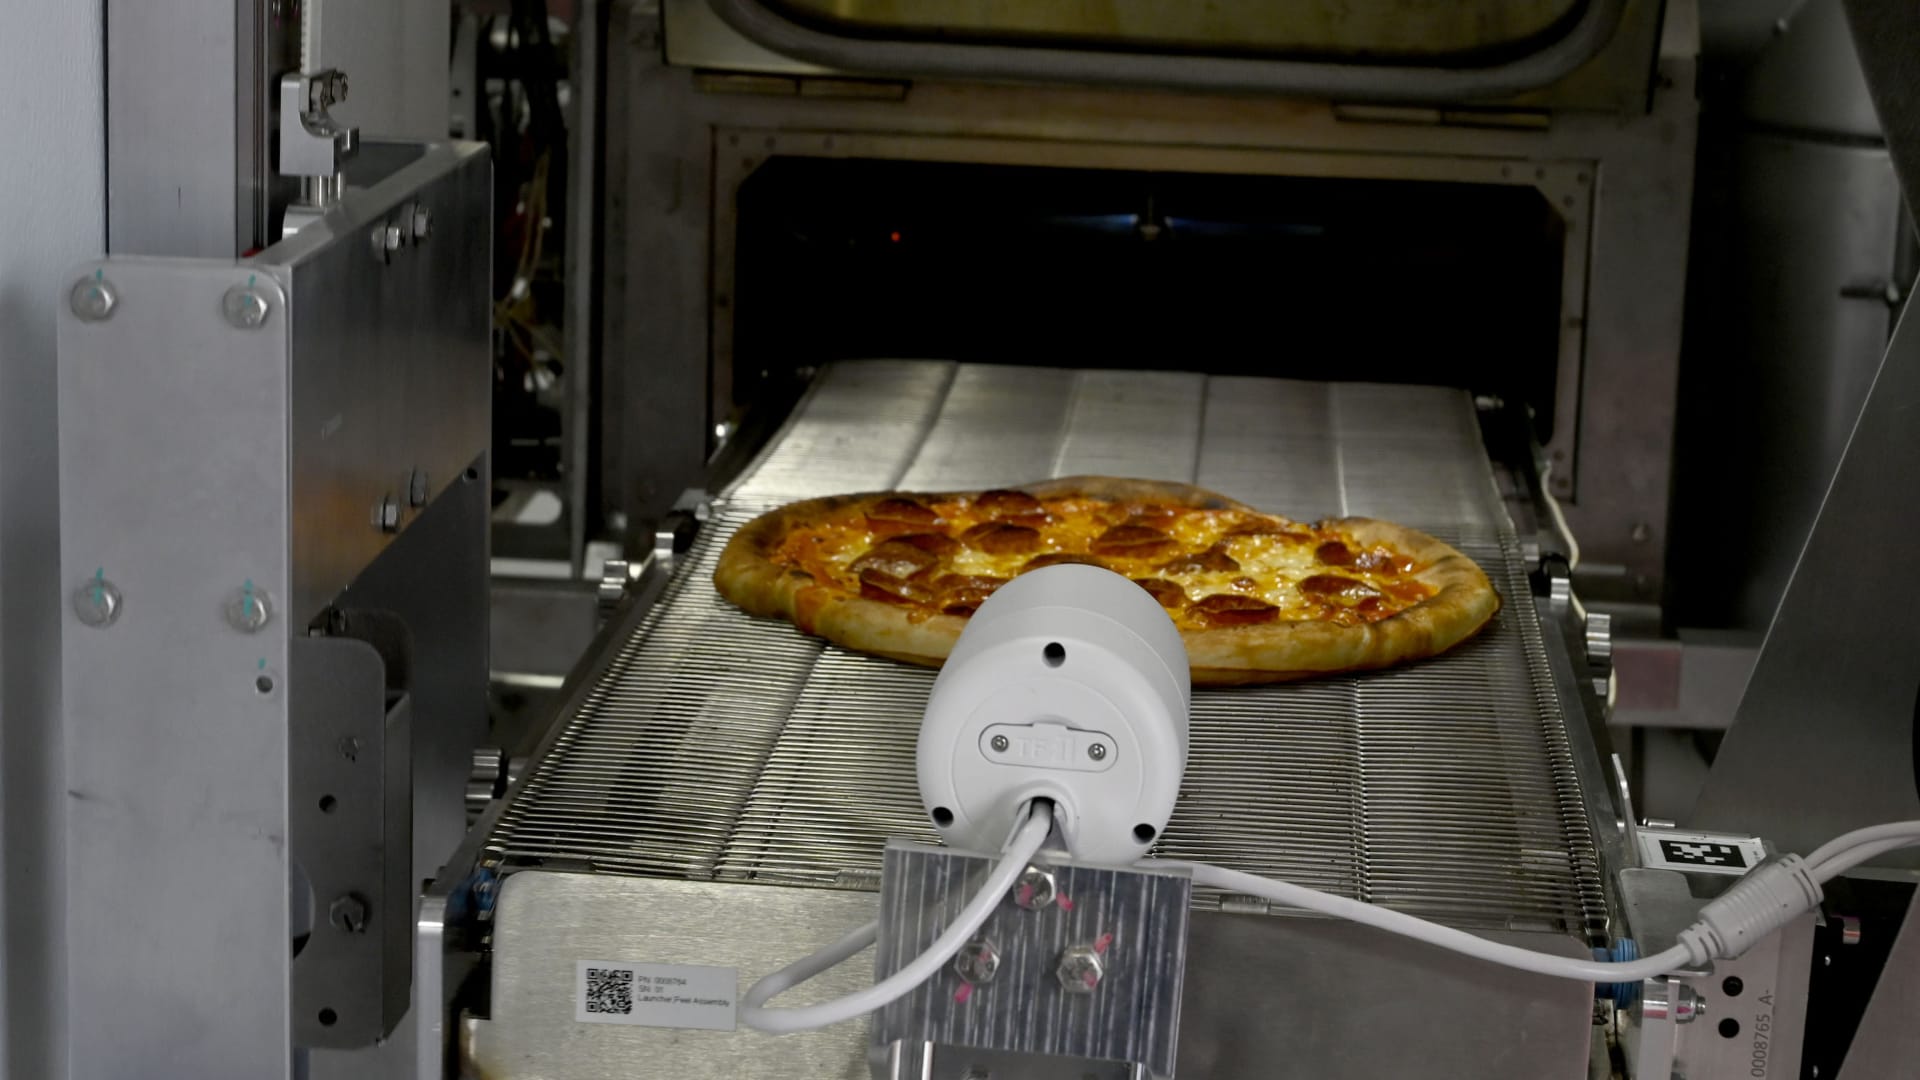 A finished pepperoni pizza exiting a machine made by Stellar Pizza, a robotics-powered mobile pizza restaurant created by a team of former SpaceX engineers